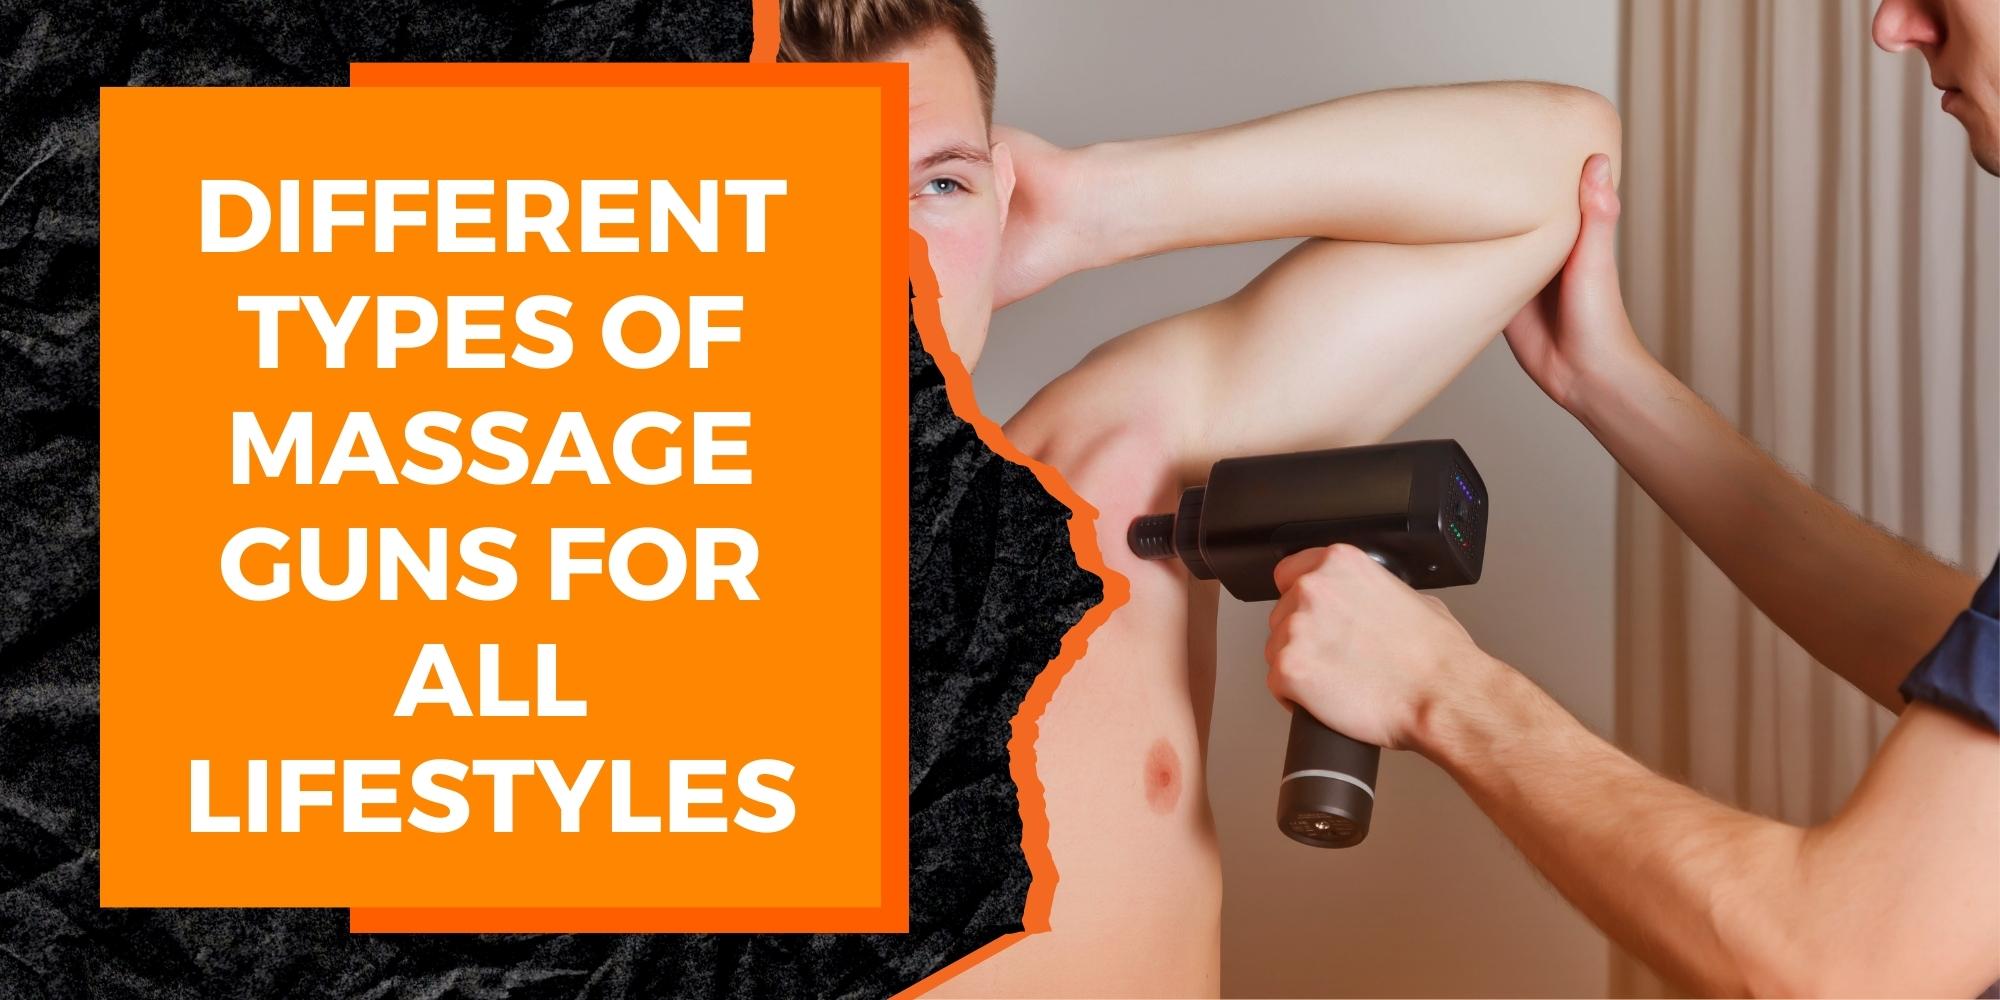 Different Types of Massage Guns for All Lifestyles